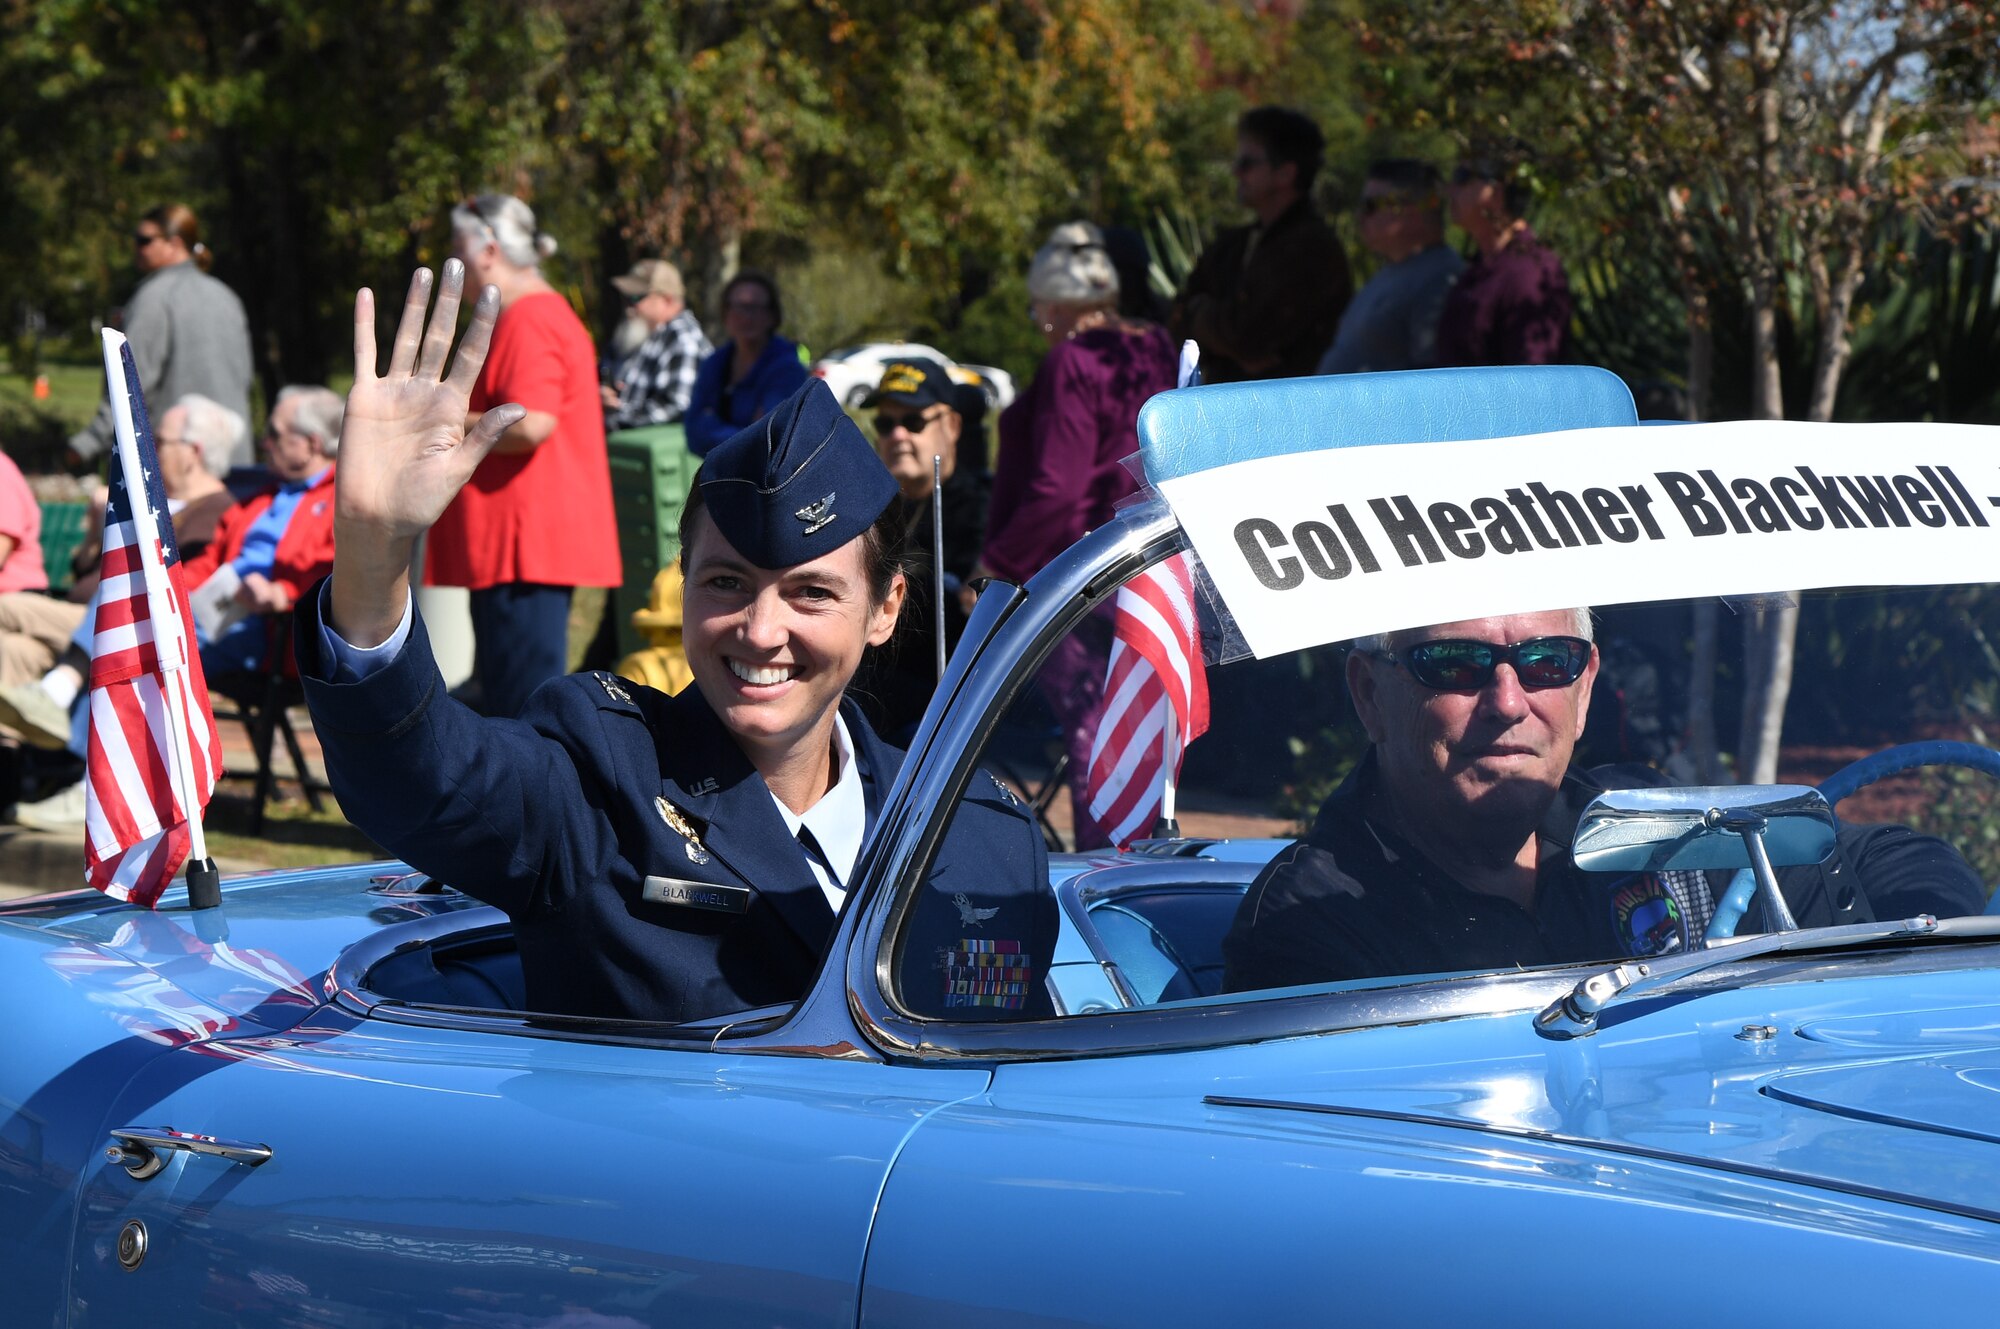 U.S. Air Force Col. Heather Blackwell, 81st Training Wing commander, waves to the crowd during the 19th Annual Gulf Coast Veterans Day Parade in DíIberville, Mississippi, Nov. 9, 2019. Keesler Air Force Base leadership, along with hundreds of Airmen, attended and participated in the largest Veterans Day parade on the Gulf Coast. (U.S. Air Force photo by Kemberly Groue)